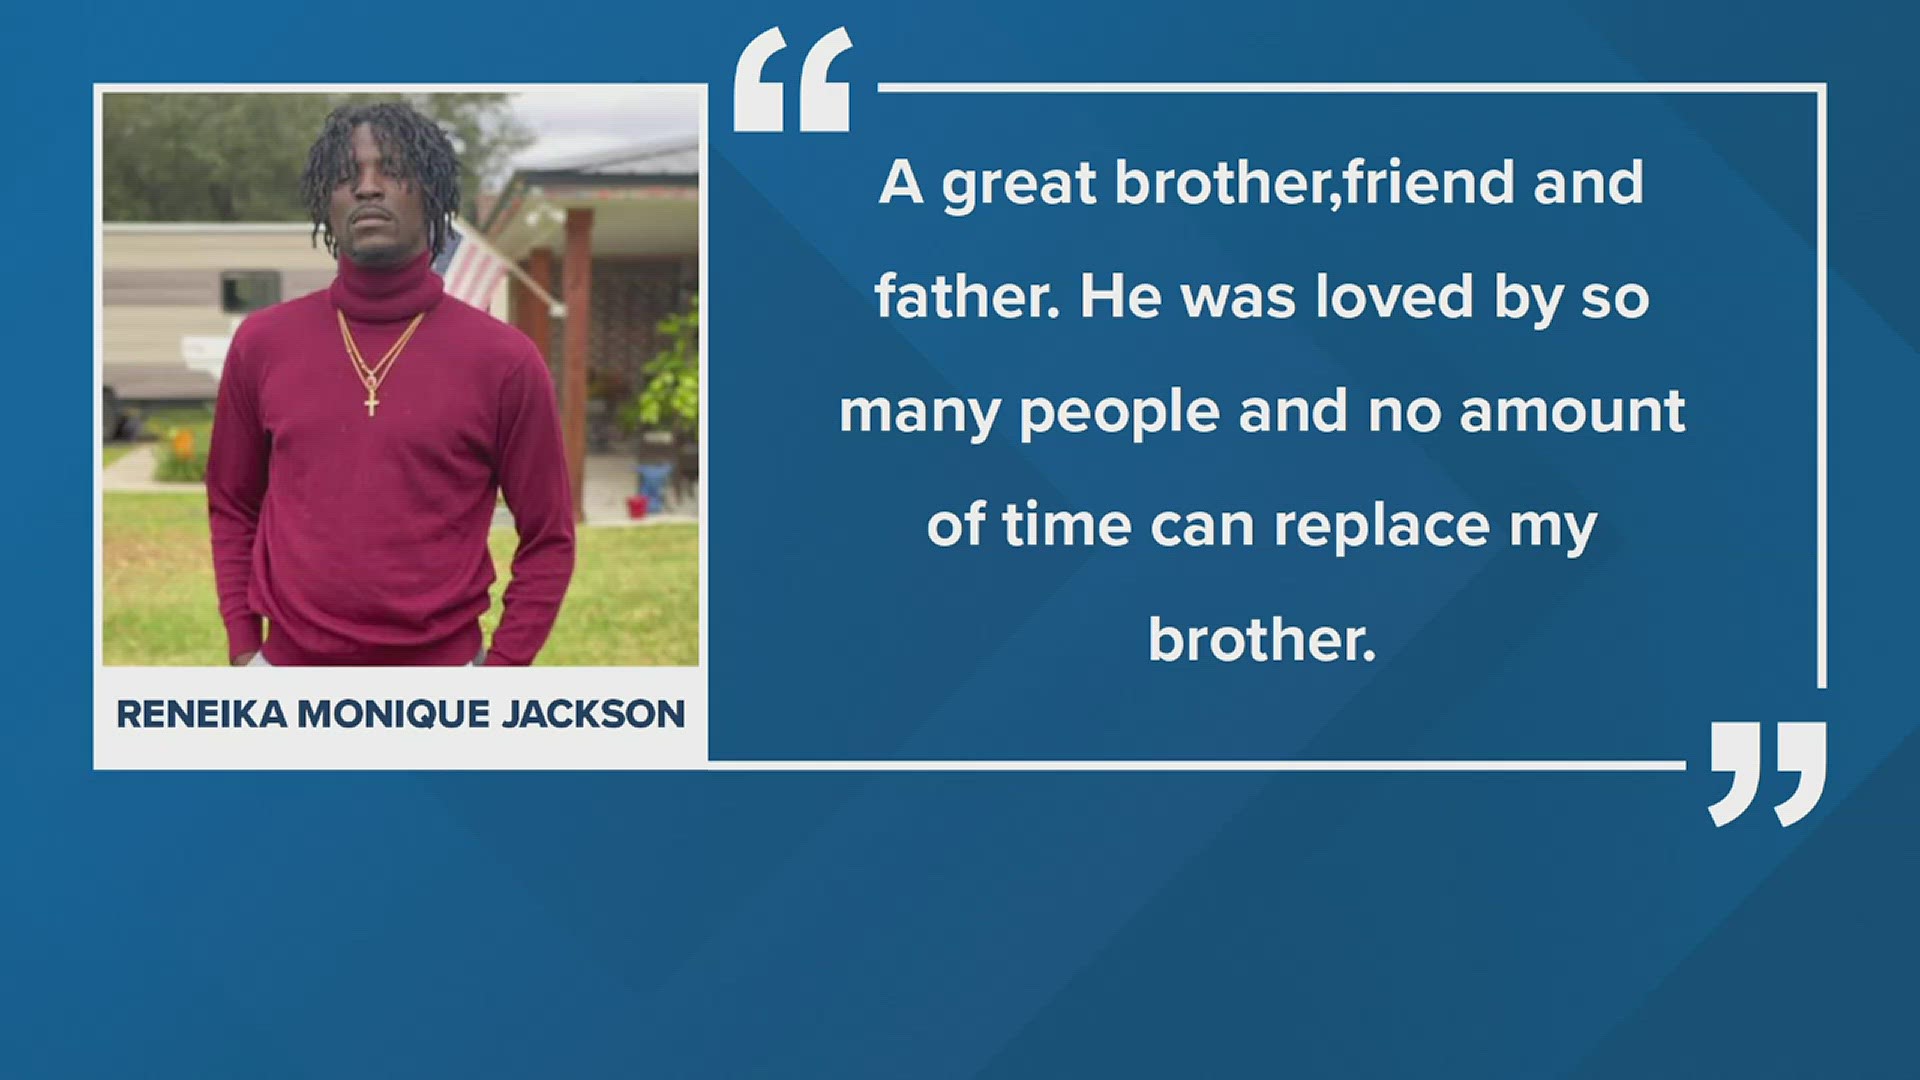 Jacoby Jackson's sister describes him as great brother, friend and father. Deshaun Tremaine Manuel was sentenced Friday to 30 years for the murder of Jackson.